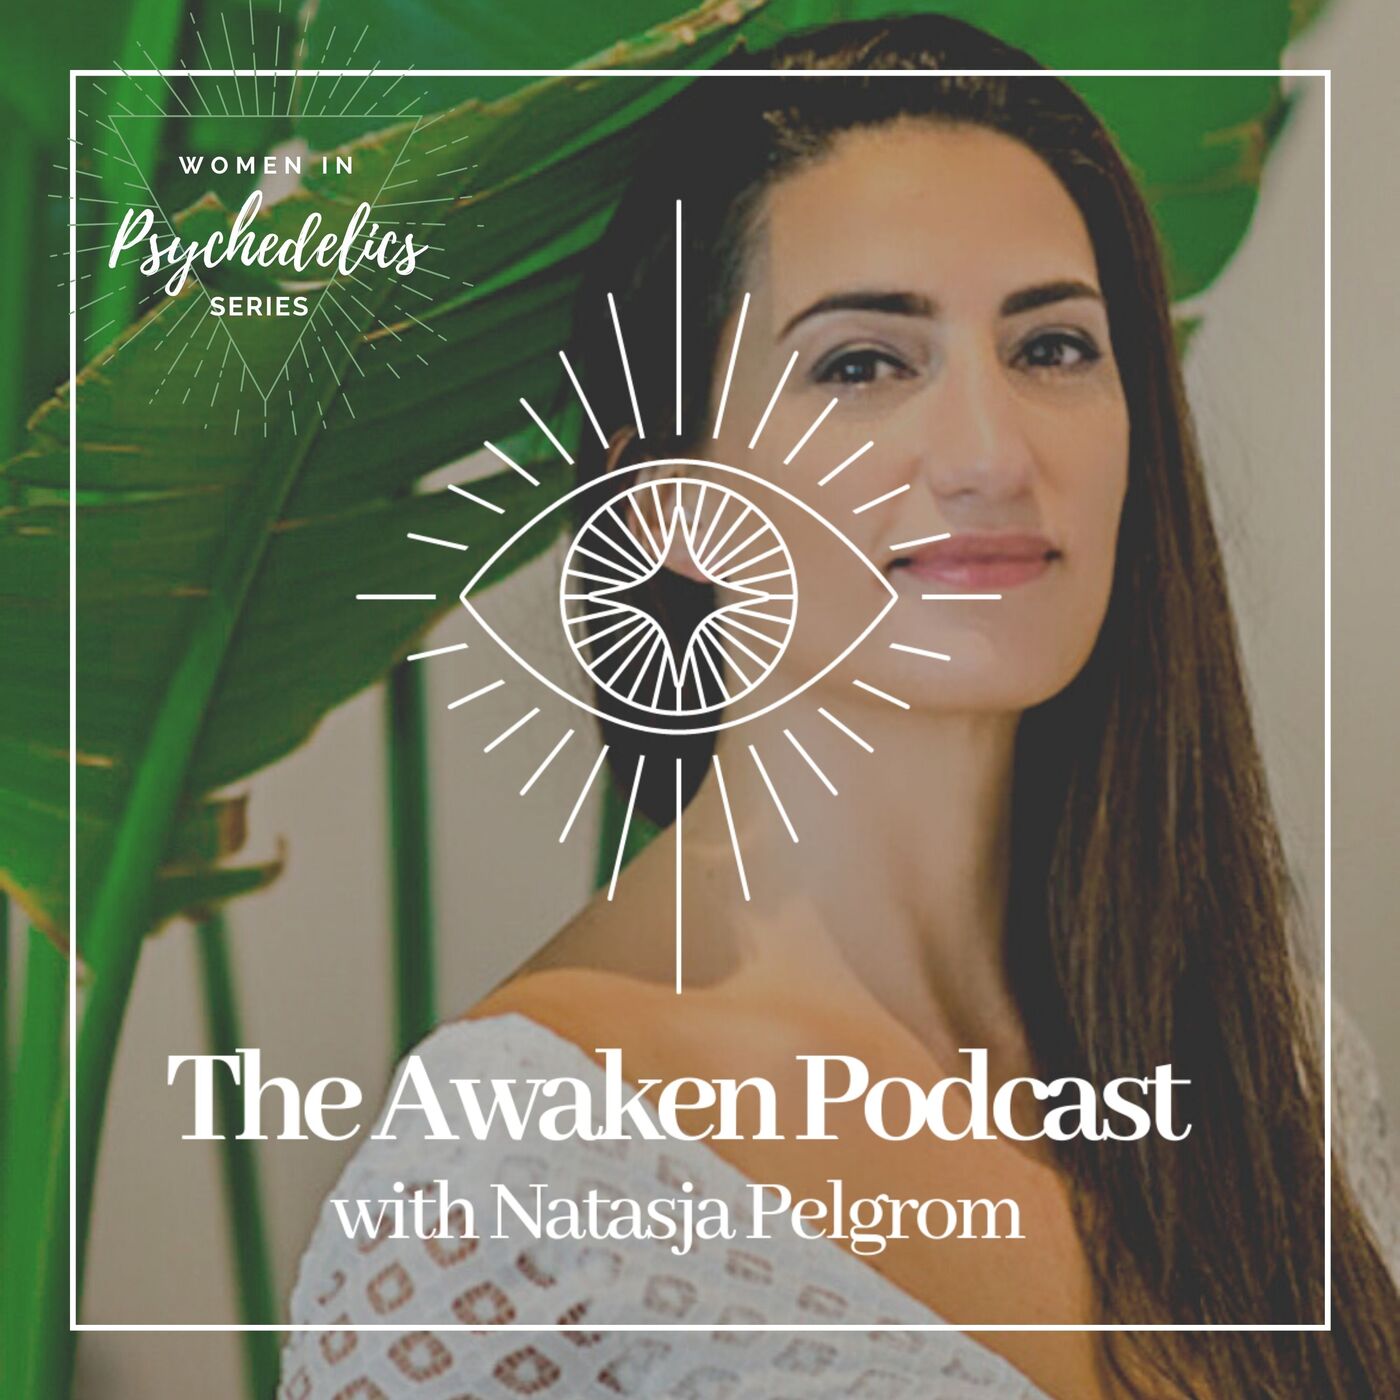 Natasja’s intro. of “Women in Psychedelics” series and Guided Meditation “Honouring Feminine Energy”